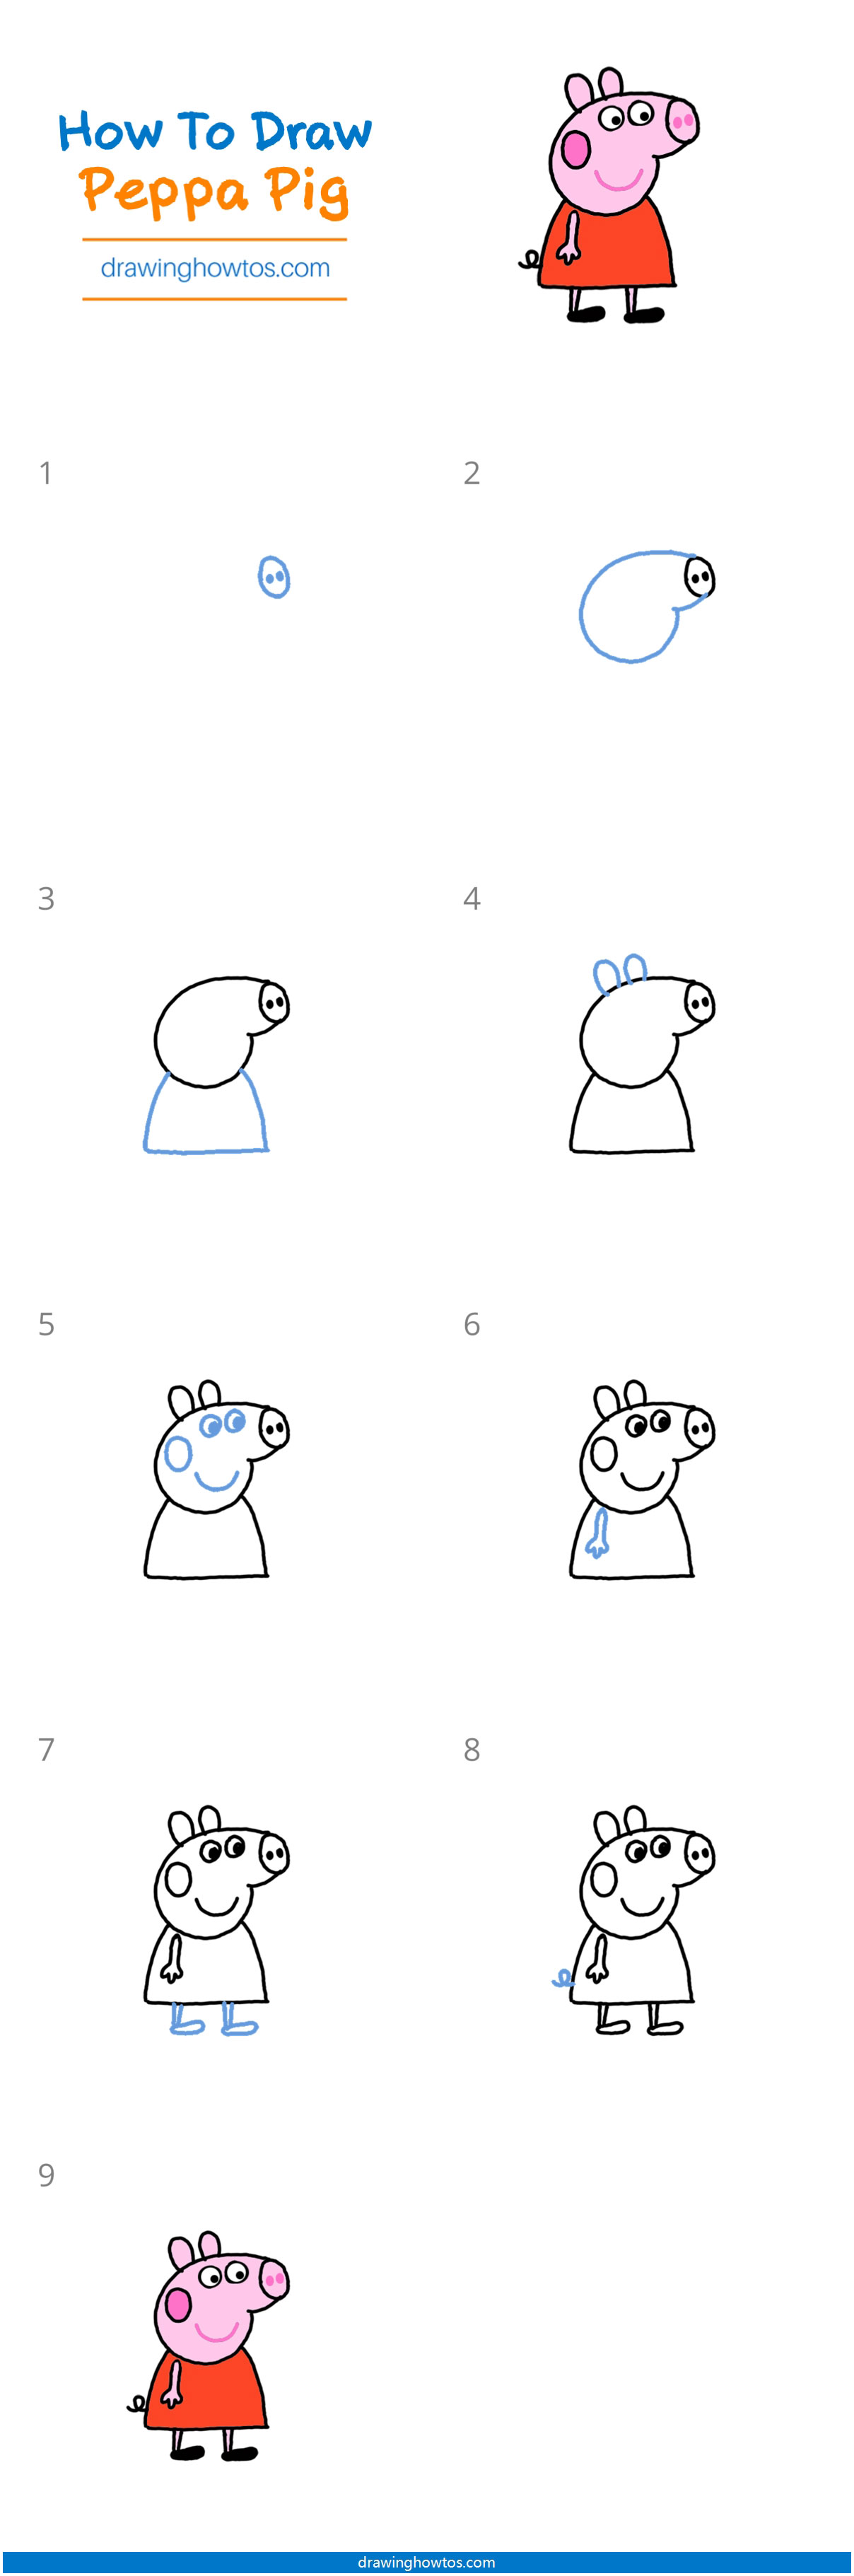 How to Draw Peppa Pig Step by Step